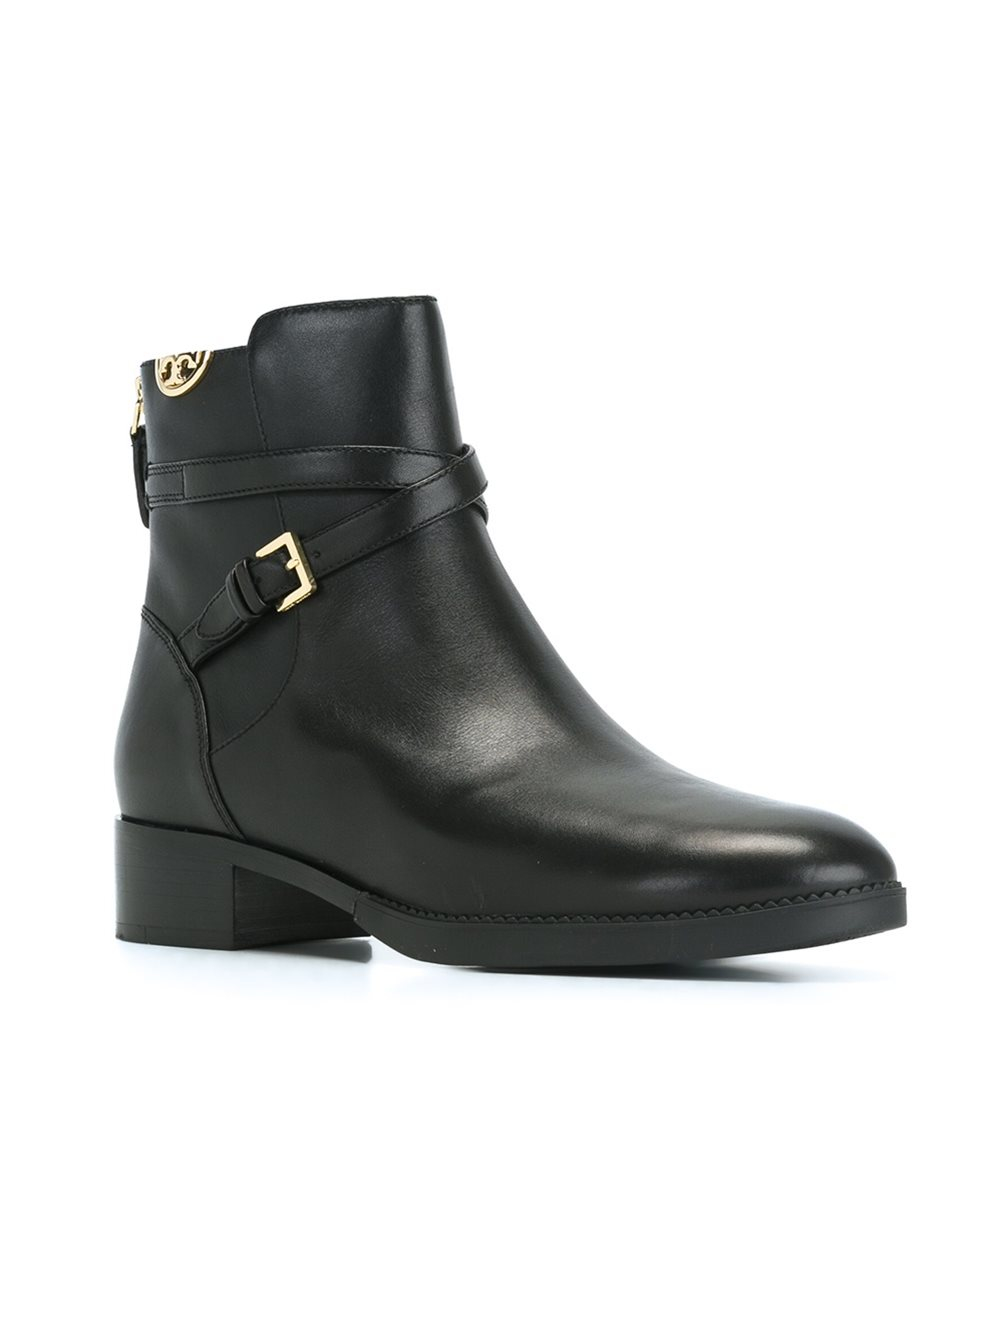 Tory Burch Leather Wrap Around Buckle Strap Booties in Black - Lyst